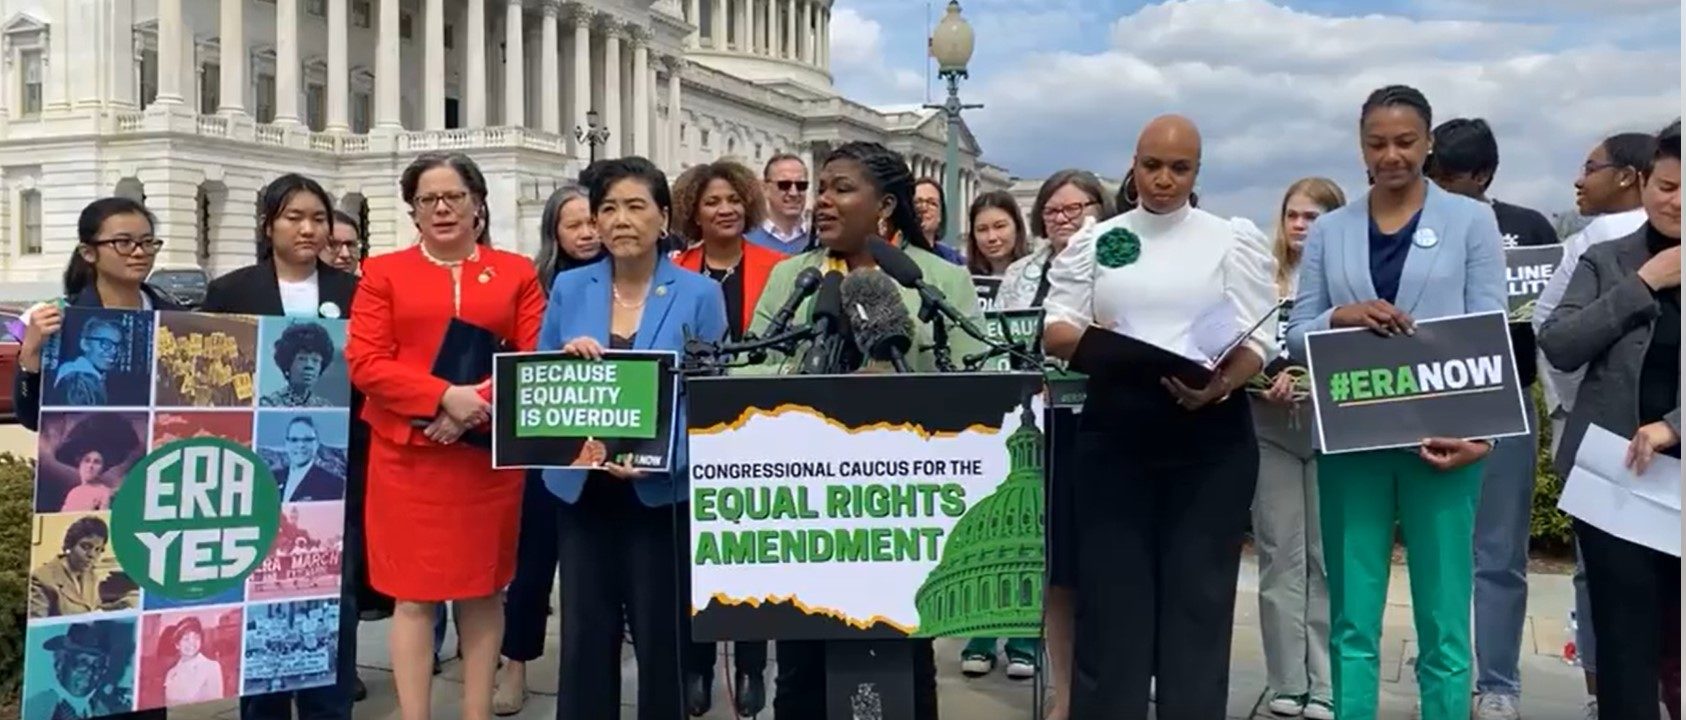 ‘Squad’ Democrats Revive Push For ‘Equal Rights Amendment’ To Constitution